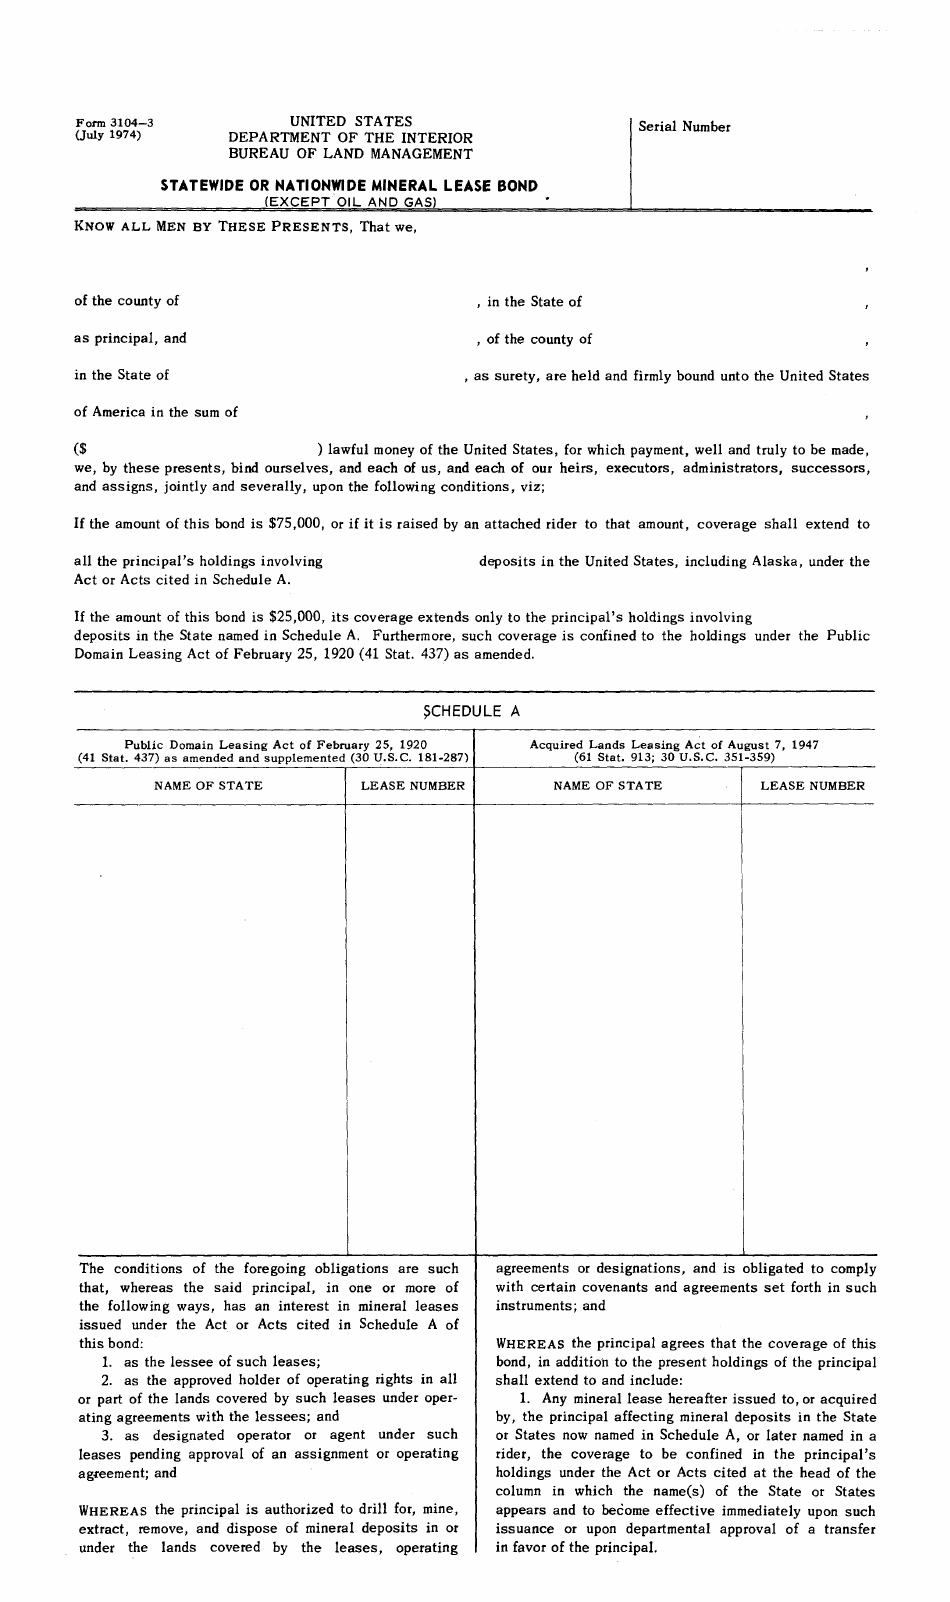 BLM Form 3104-3 Statewide or Nationwide Mineral Lease Bond, Page 1